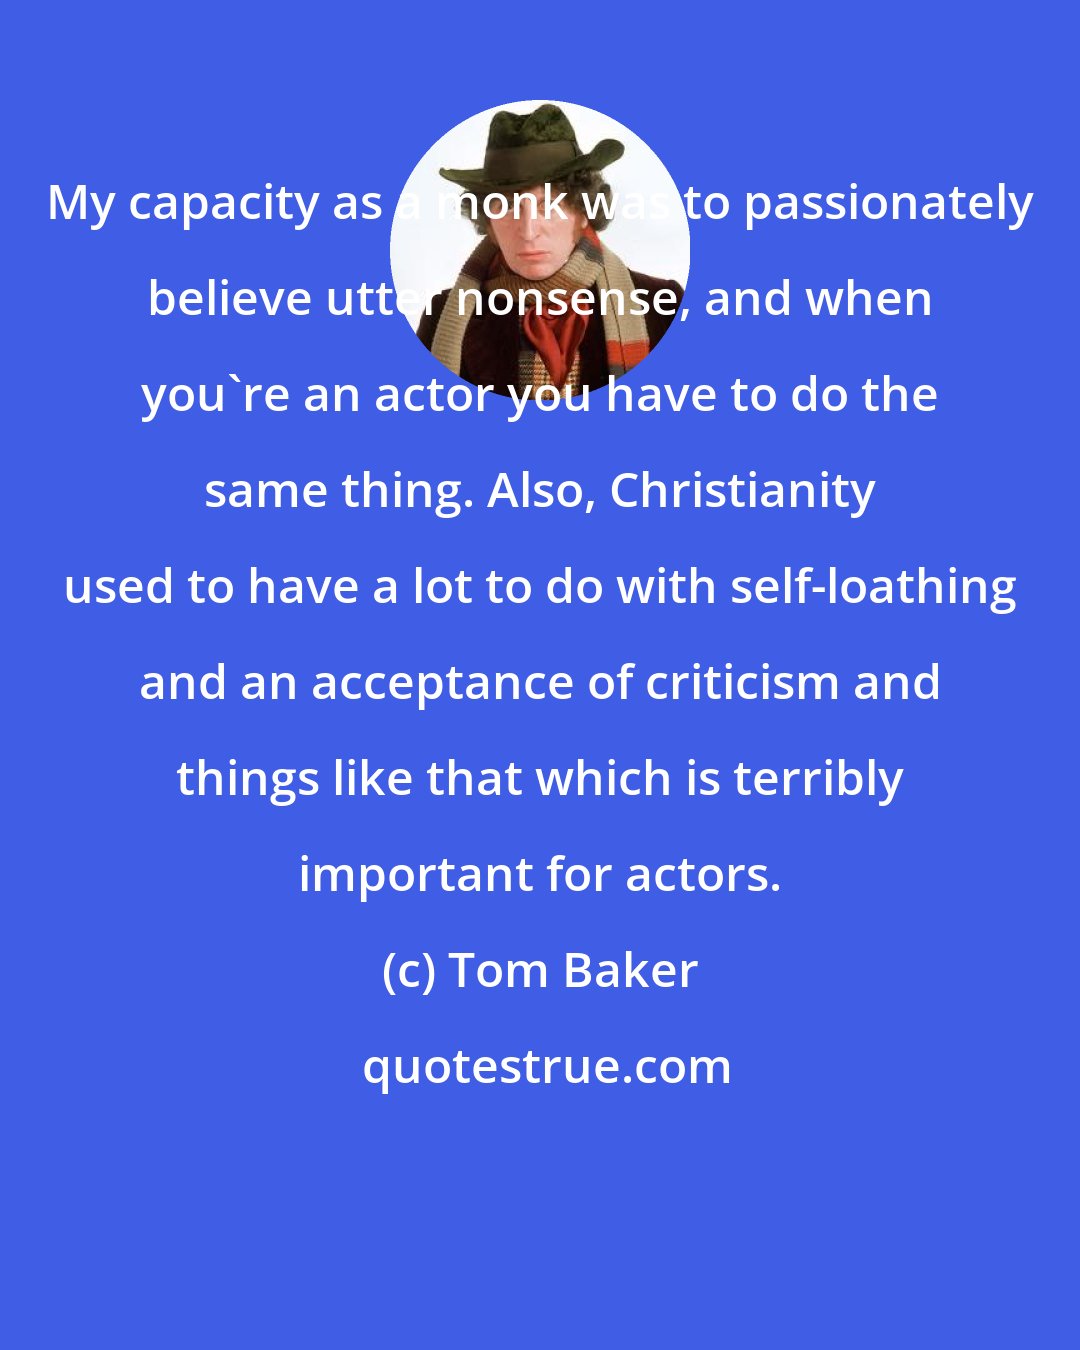 Tom Baker: My capacity as a monk was to passionately believe utter nonsense, and when you're an actor you have to do the same thing. Also, Christianity used to have a lot to do with self-loathing and an acceptance of criticism and things like that which is terribly important for actors.